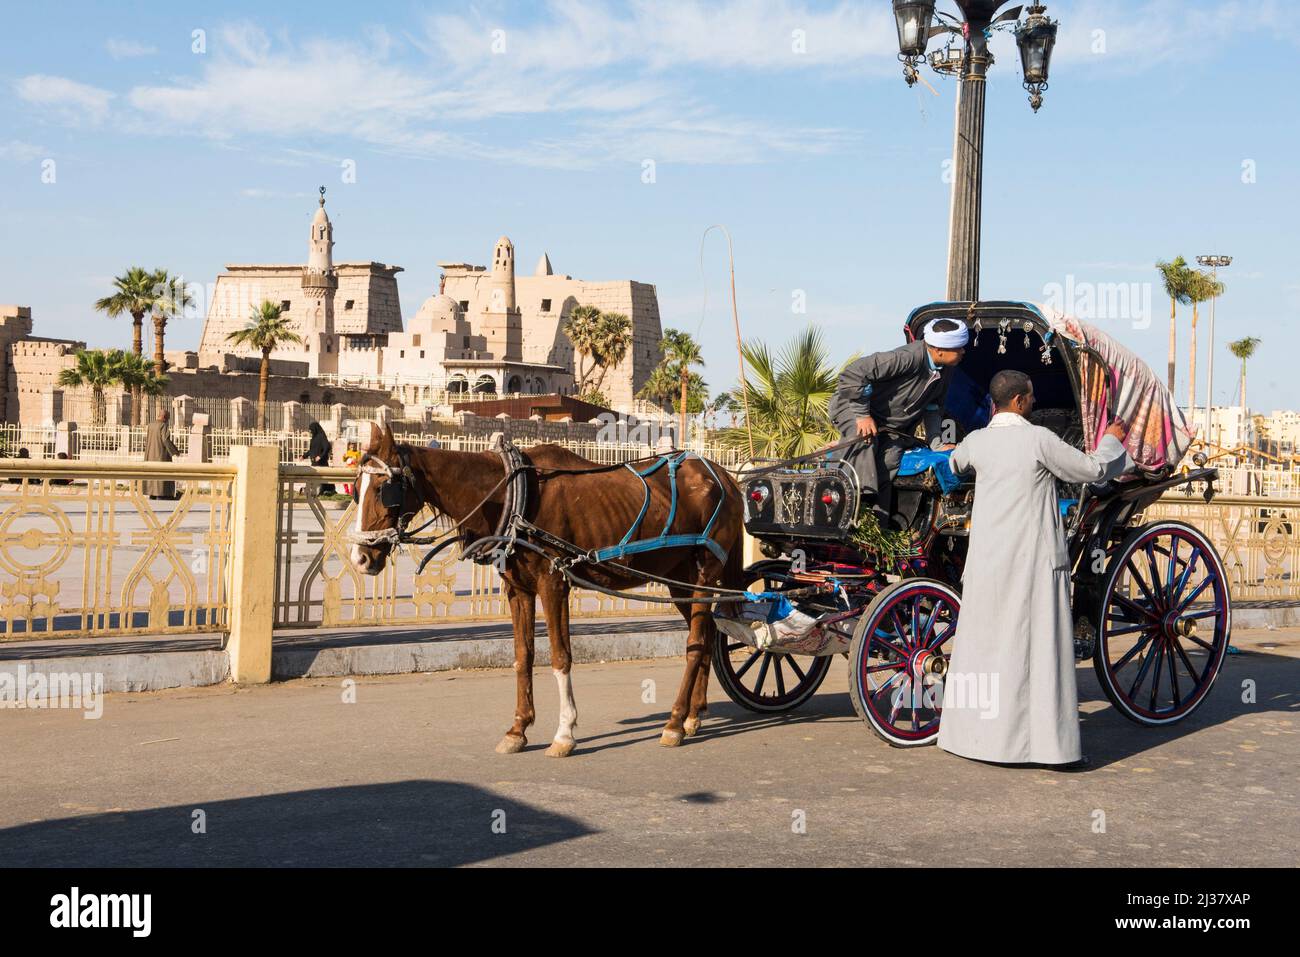 Horse-drawn carriage in front of the Luxor Temple, Egypt, Northeast Africa. Stock Photo